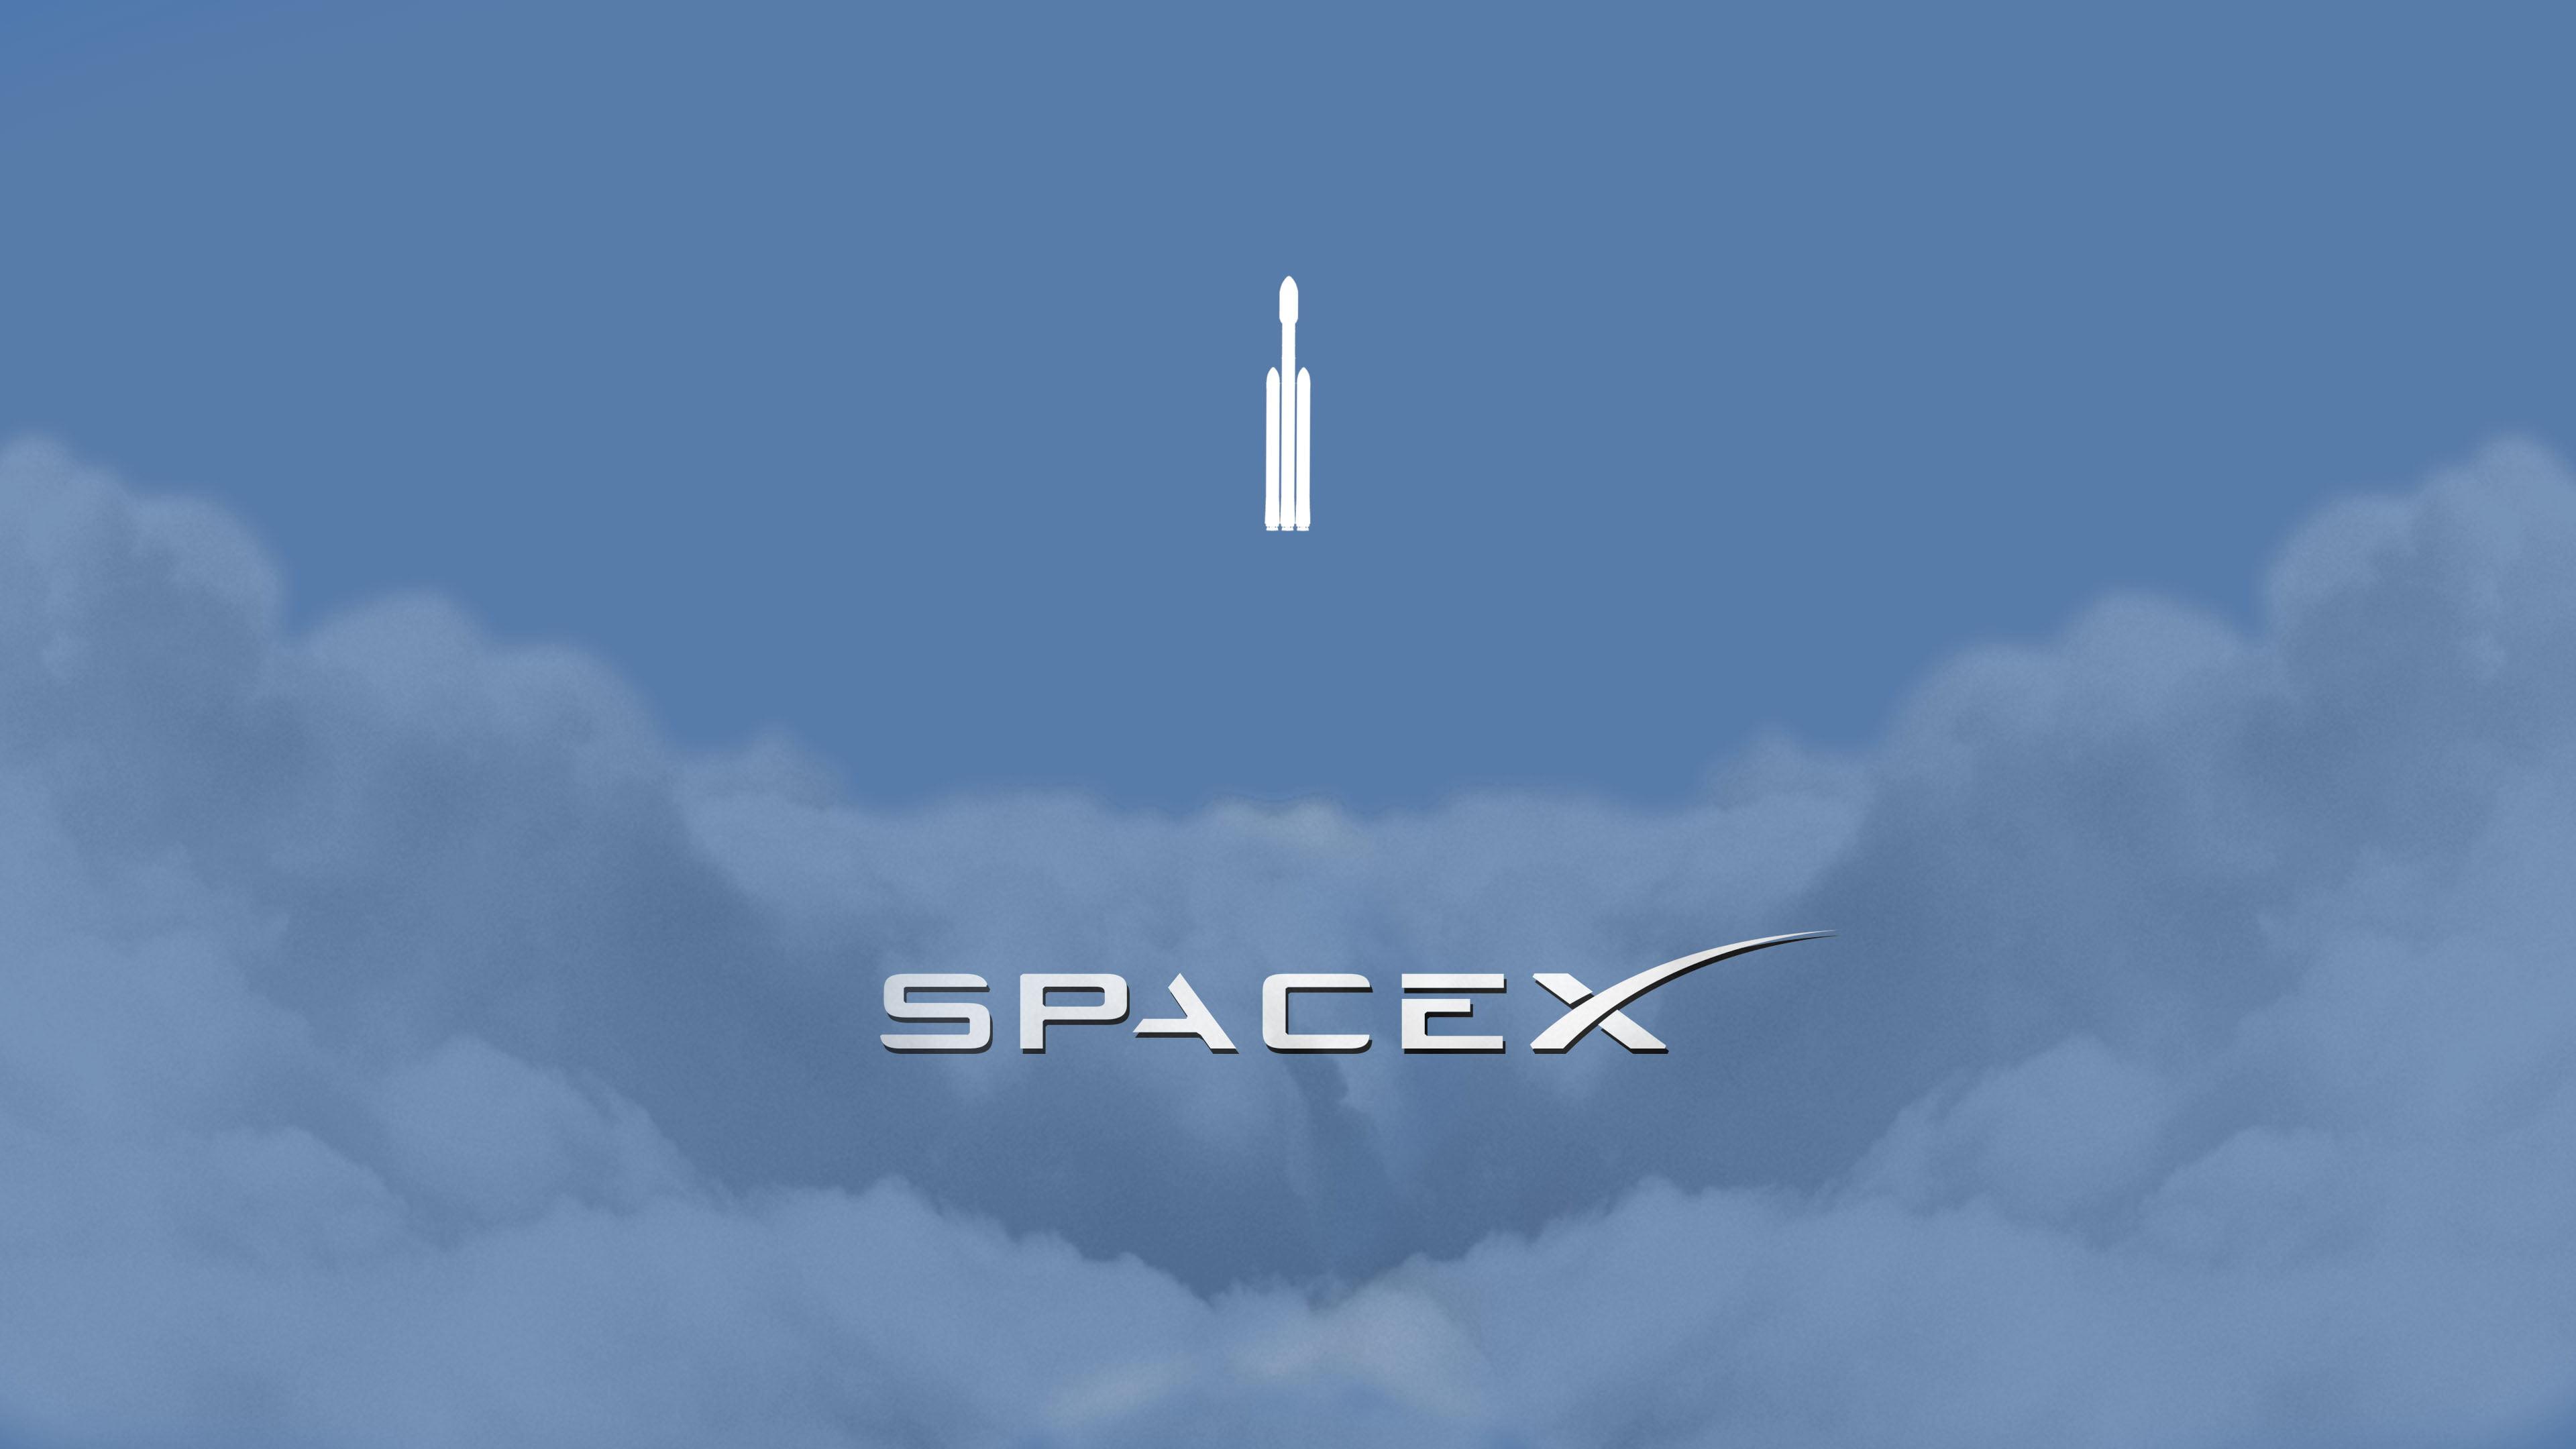 White text on gray background, space, spaceship, minimalism, clouds